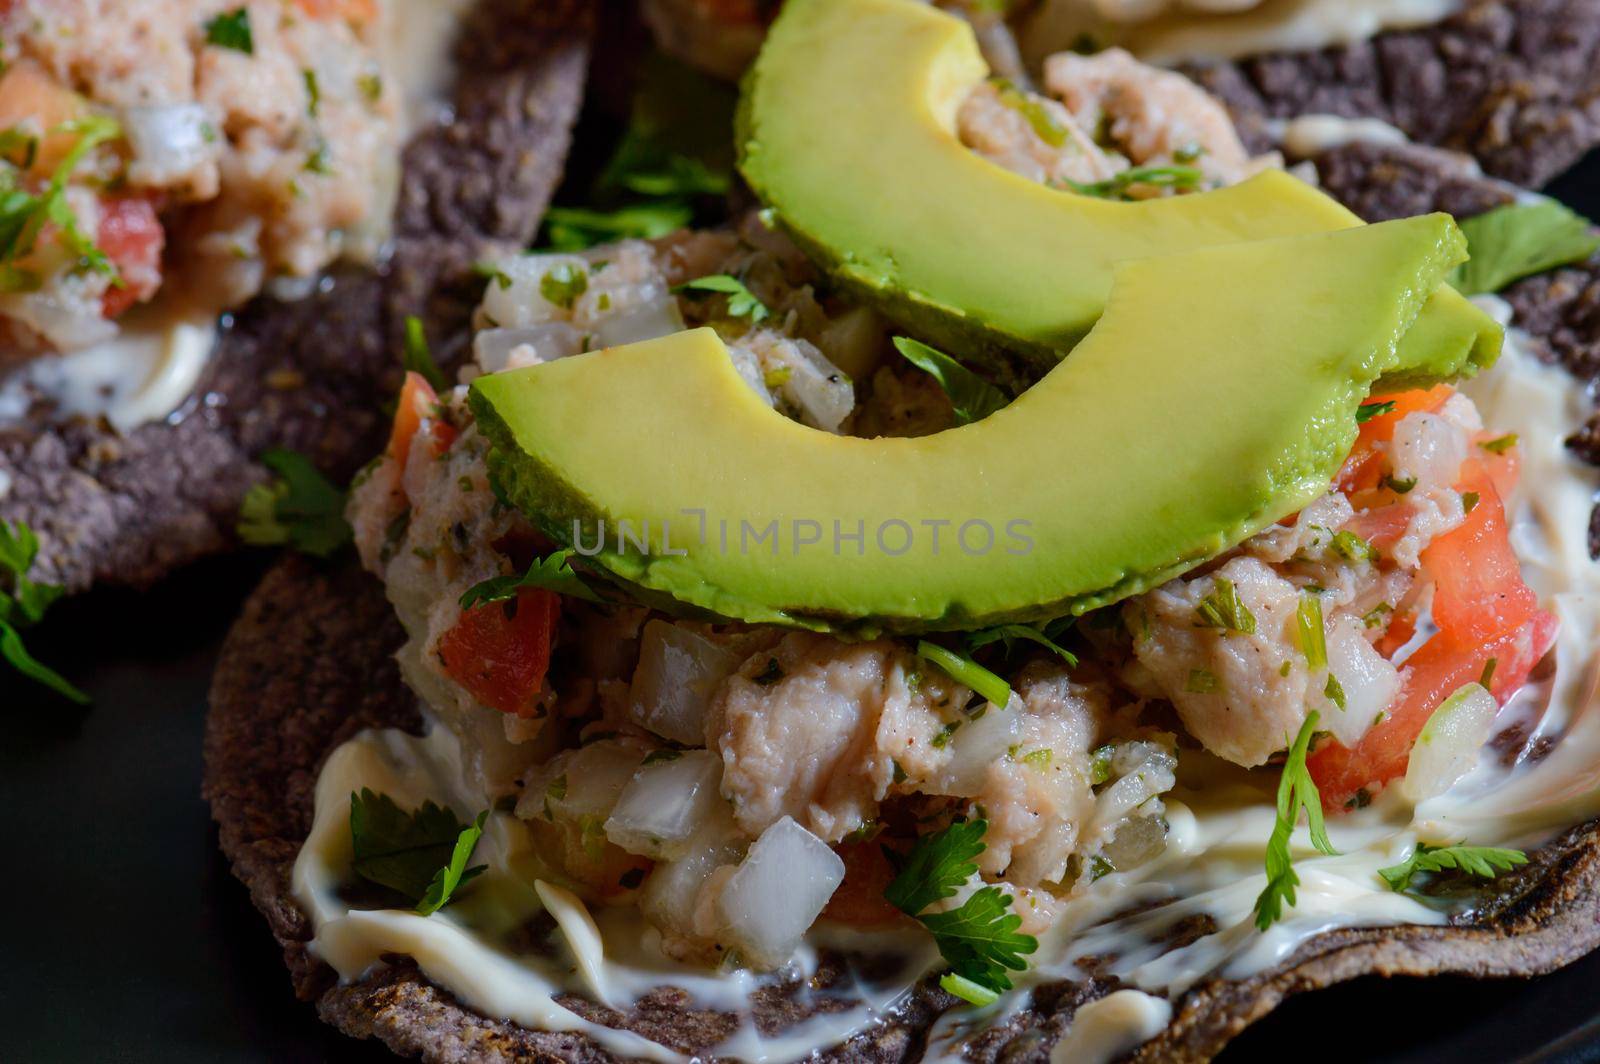 Fish ceviche on blue corn tostadas. Mexican food. Seviche made with tilapia, white fish, onion, tomato, cilantro served on tostadas with mayonnaise